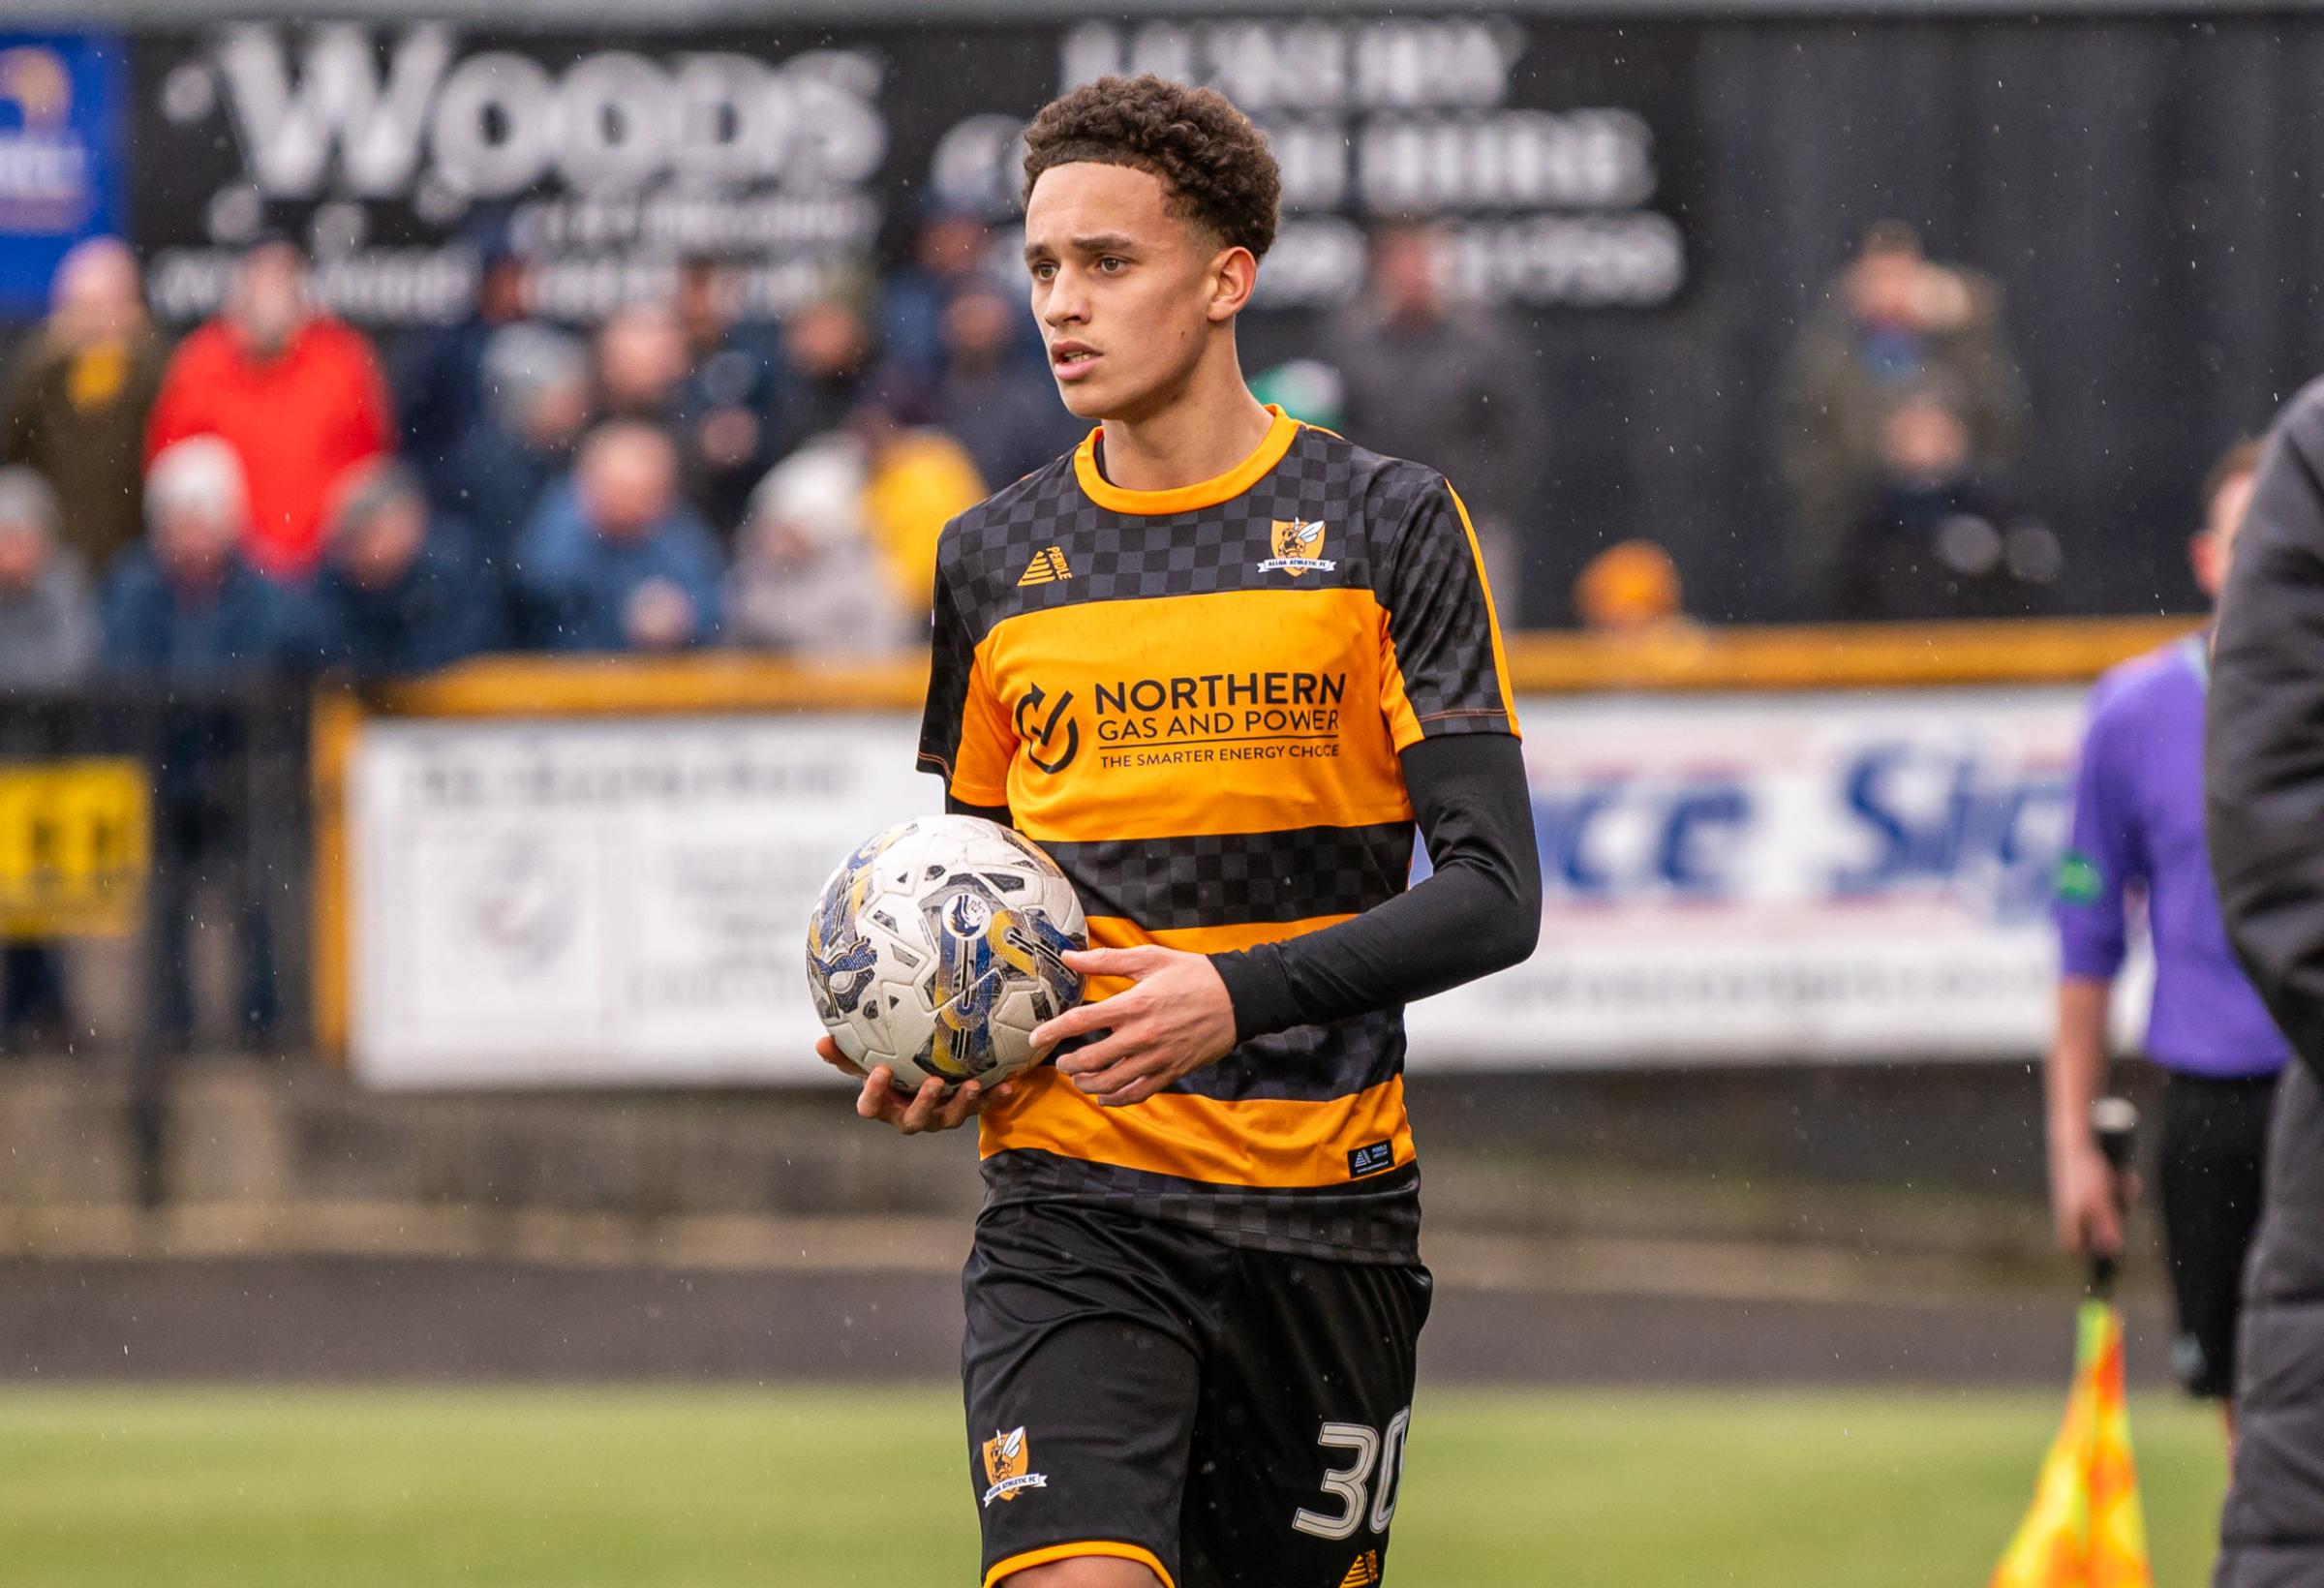 St Mirren loanee Ethan Sutherland on signing for Alloa Athletic